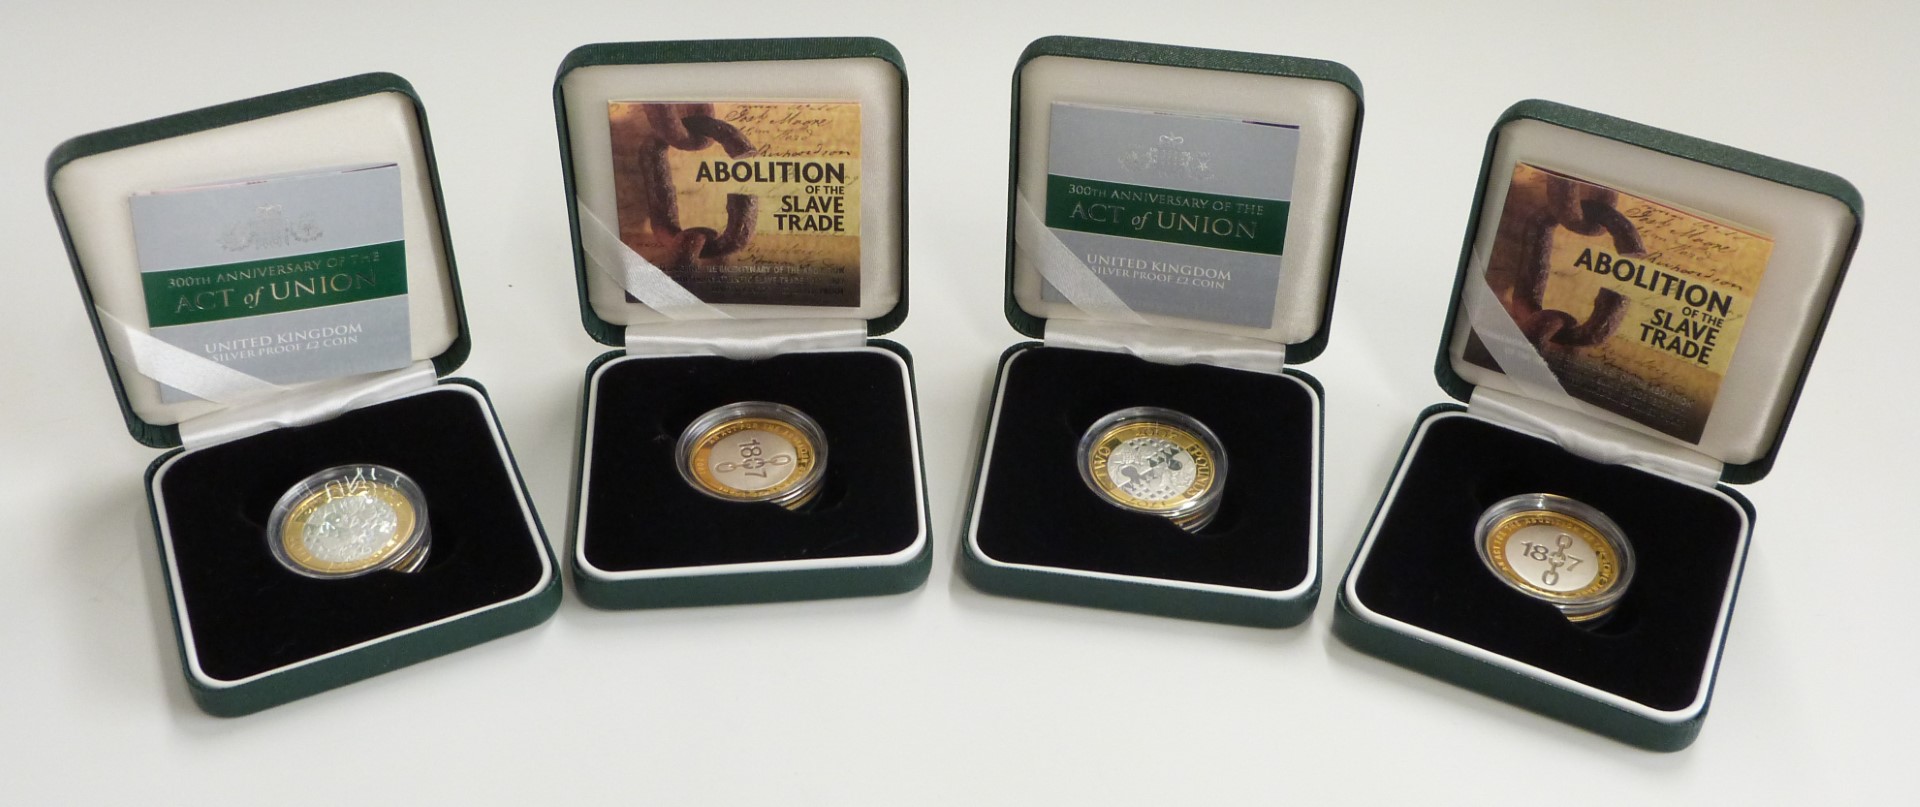 Four Royal Mint silver proof £2 coins for 2007, two Acts of Union and two slavery examples, all